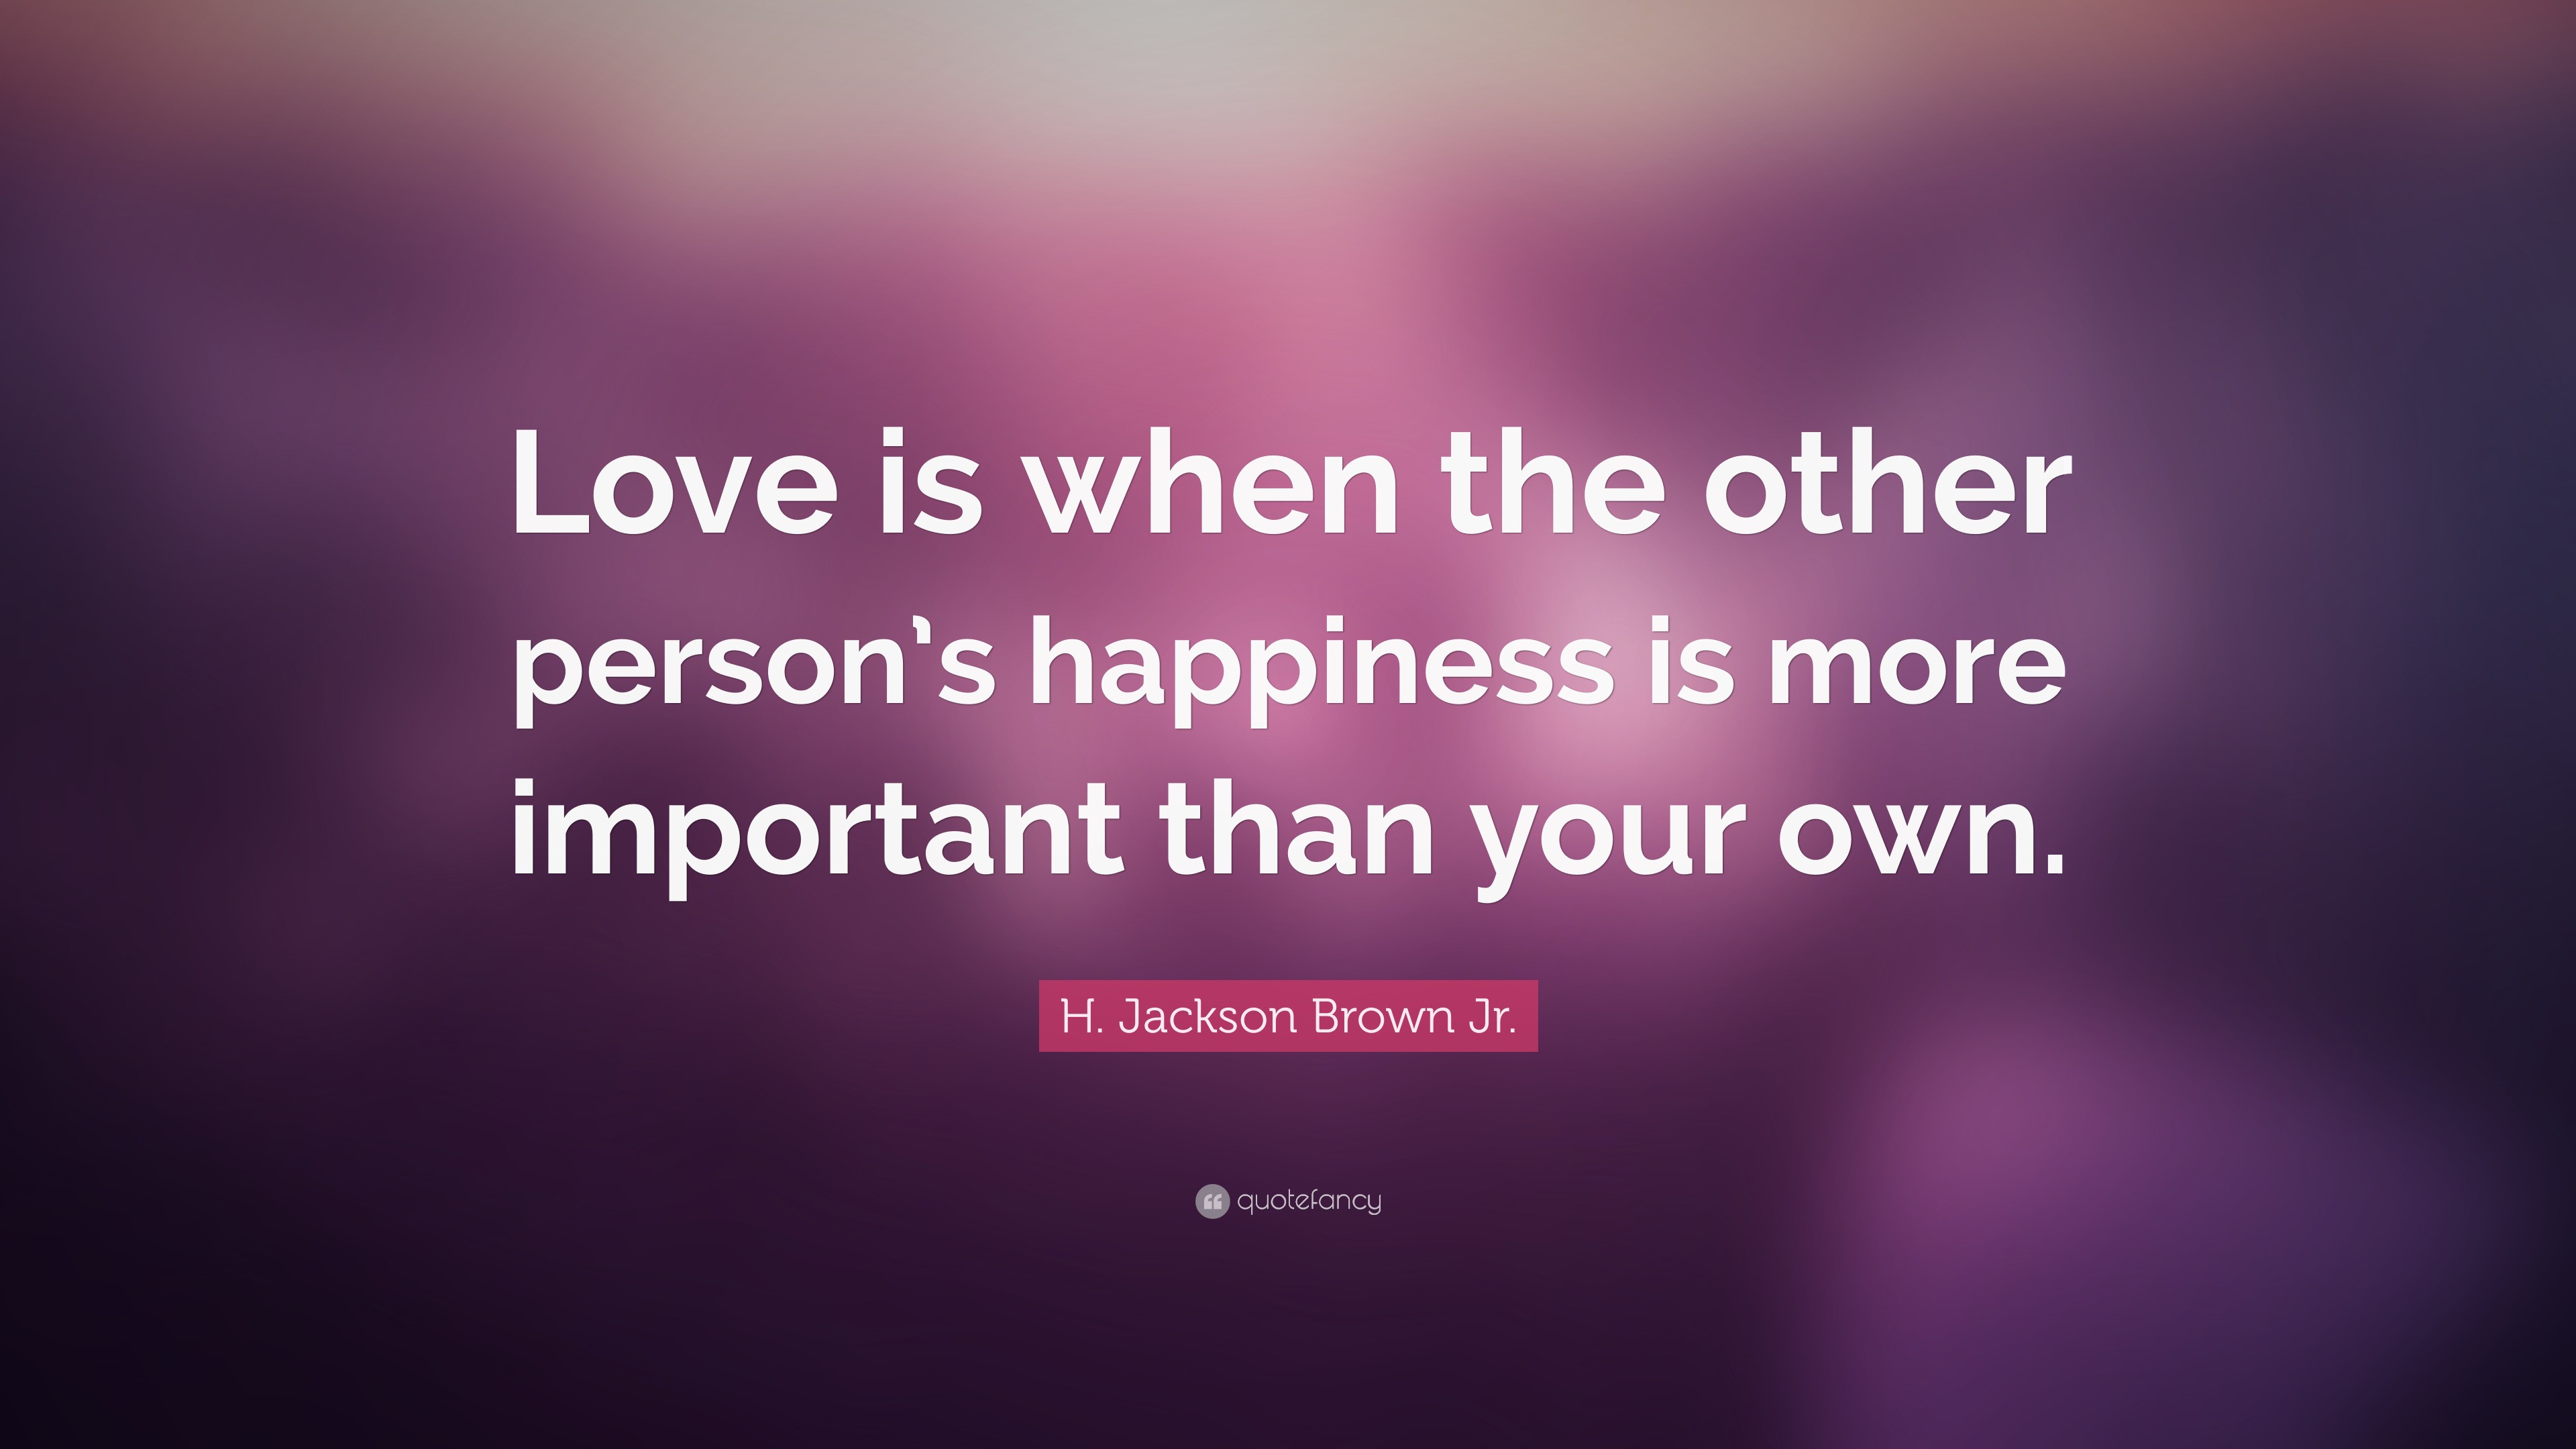 H. Jackson Brown Jr. Quote: “Love is when the other person’s happiness ...